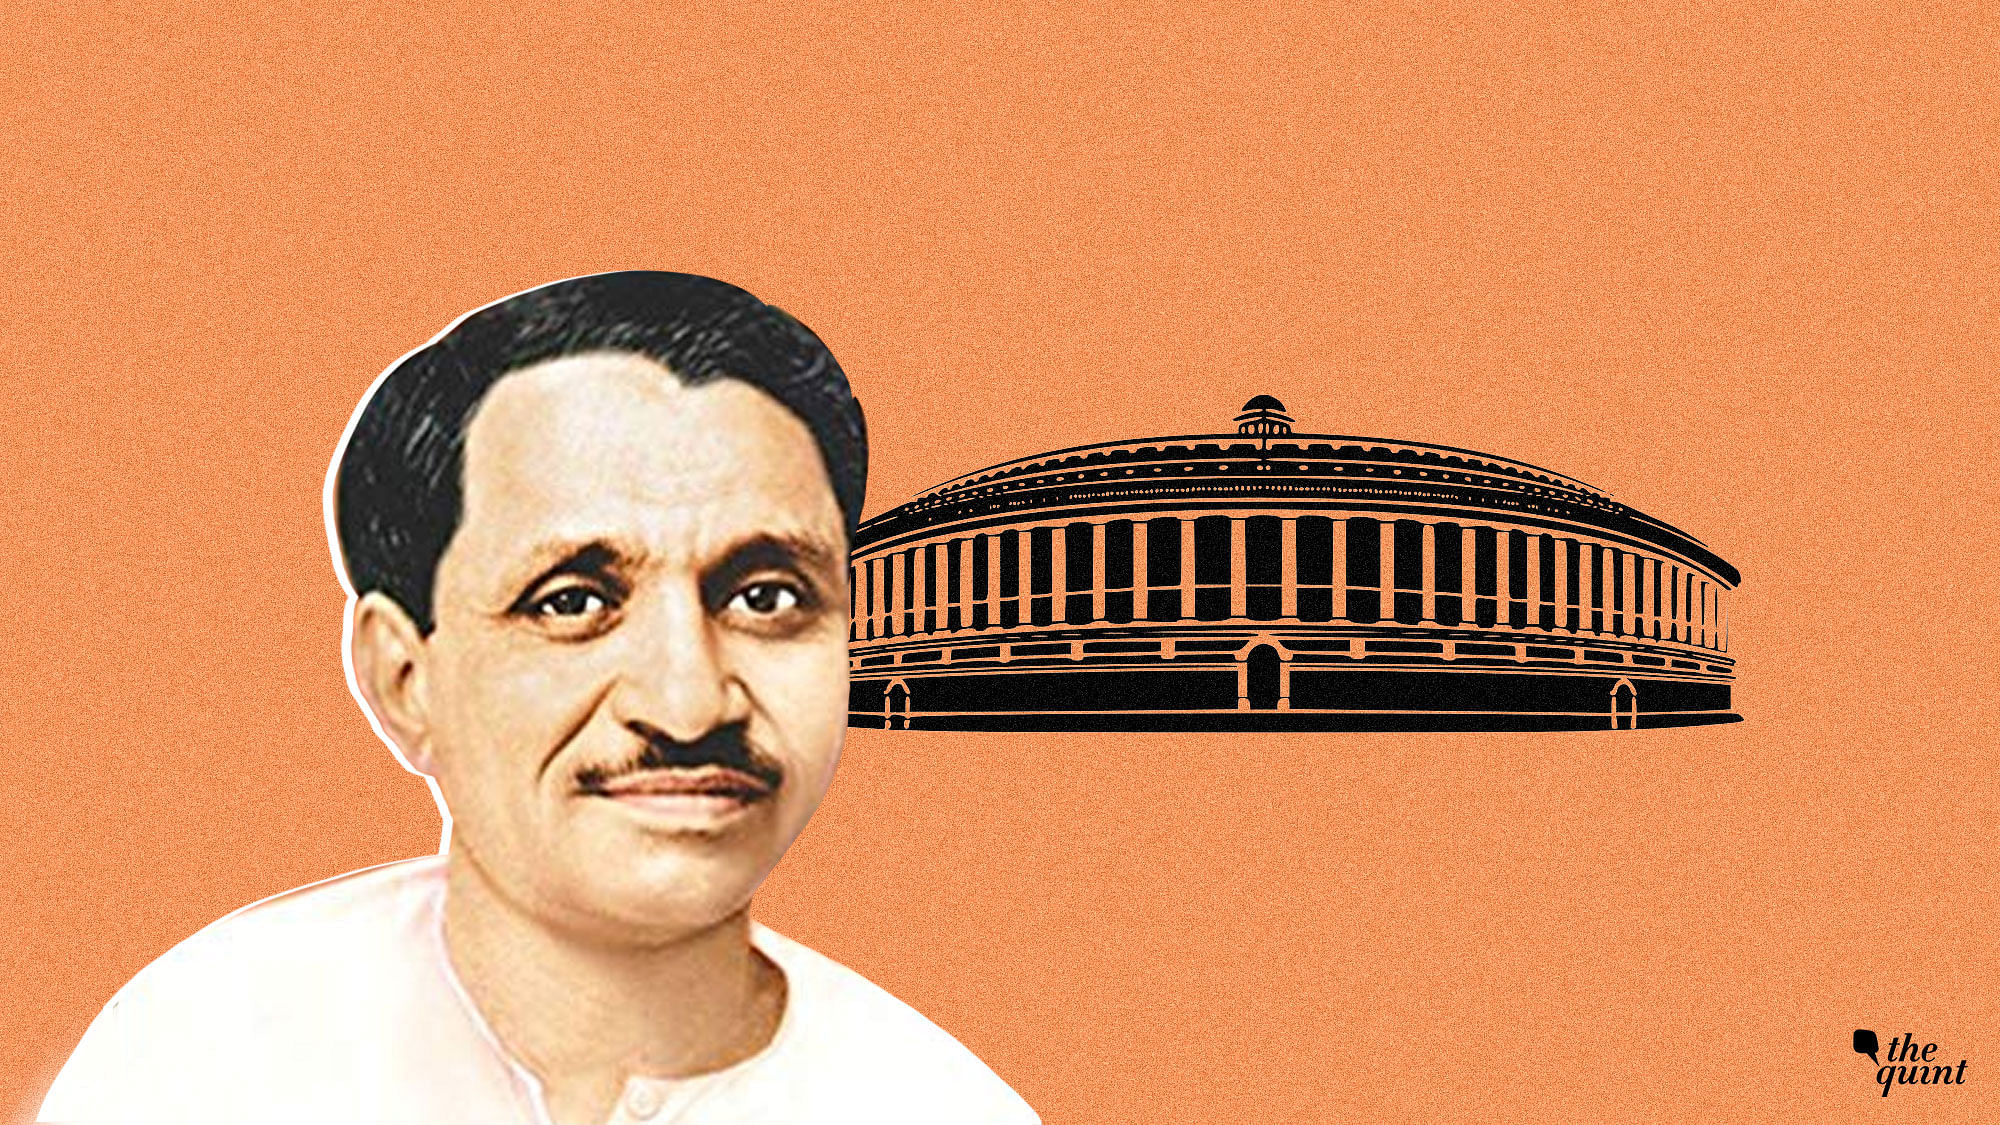 The Gehlot government has dropped RSS ideologue Deendayal Upadhyay’s name from a scholarship test.